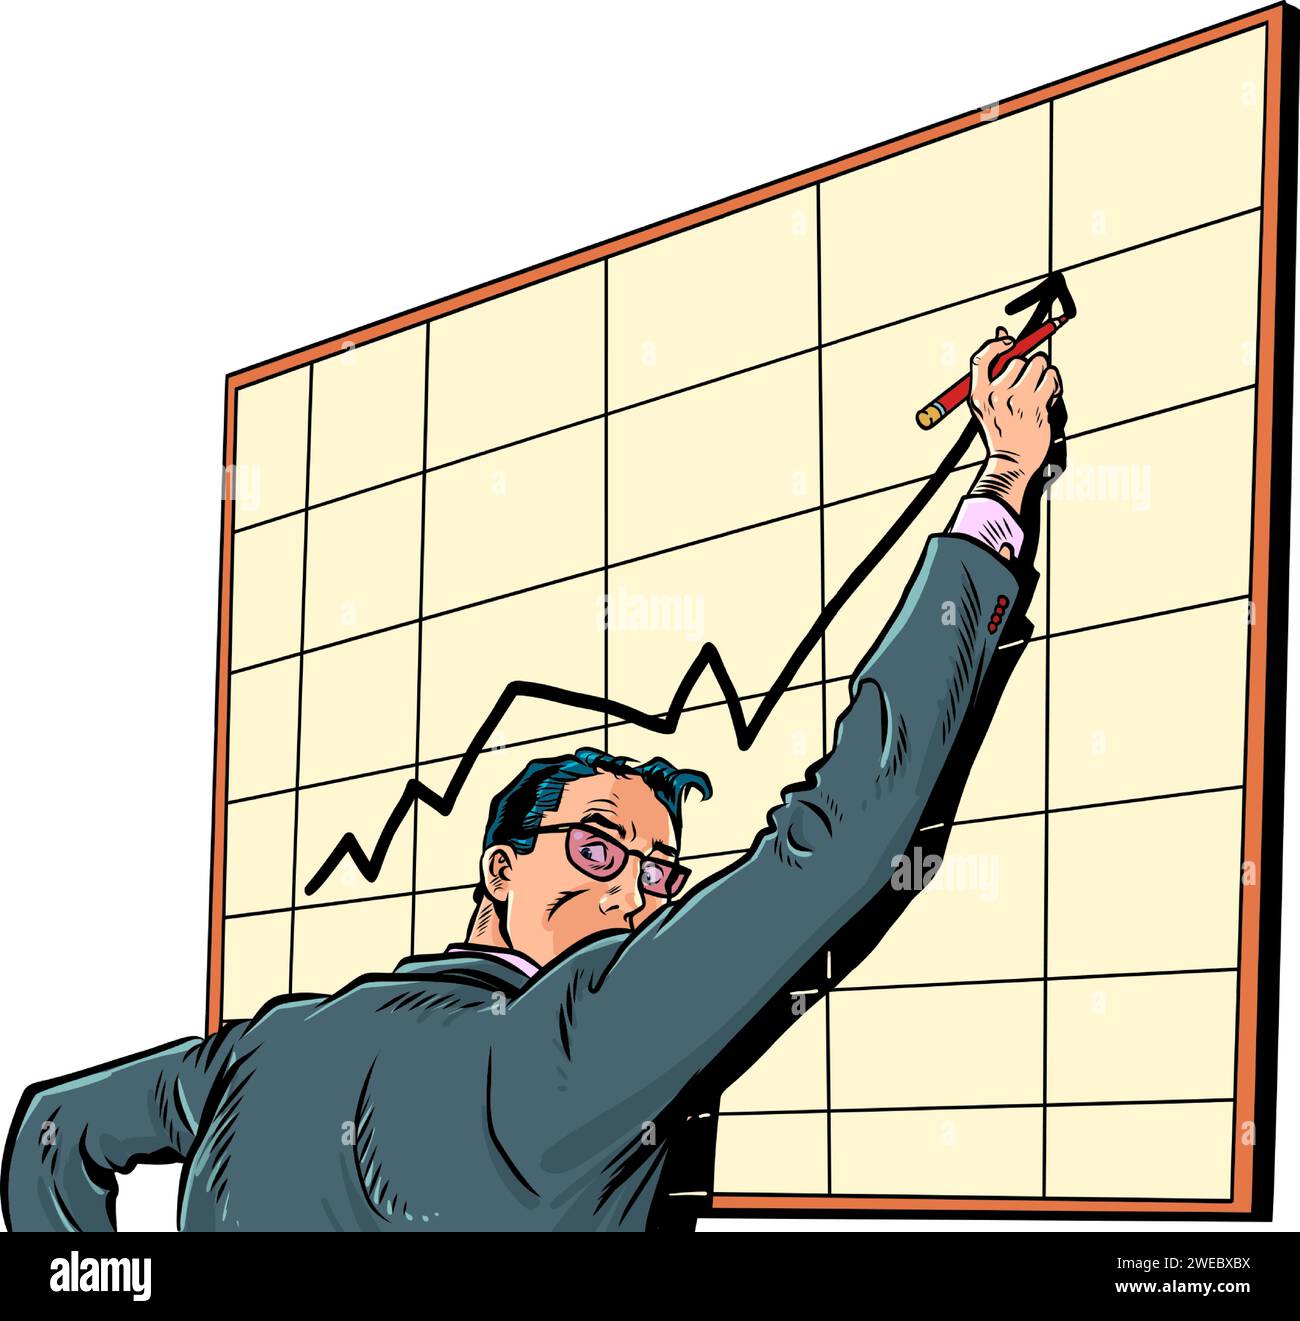 Growth of shares in the financial market. The employee's career moves up the career ladder. A man in a suit stands at a board with a chart. Pop Art Re Stock Vector